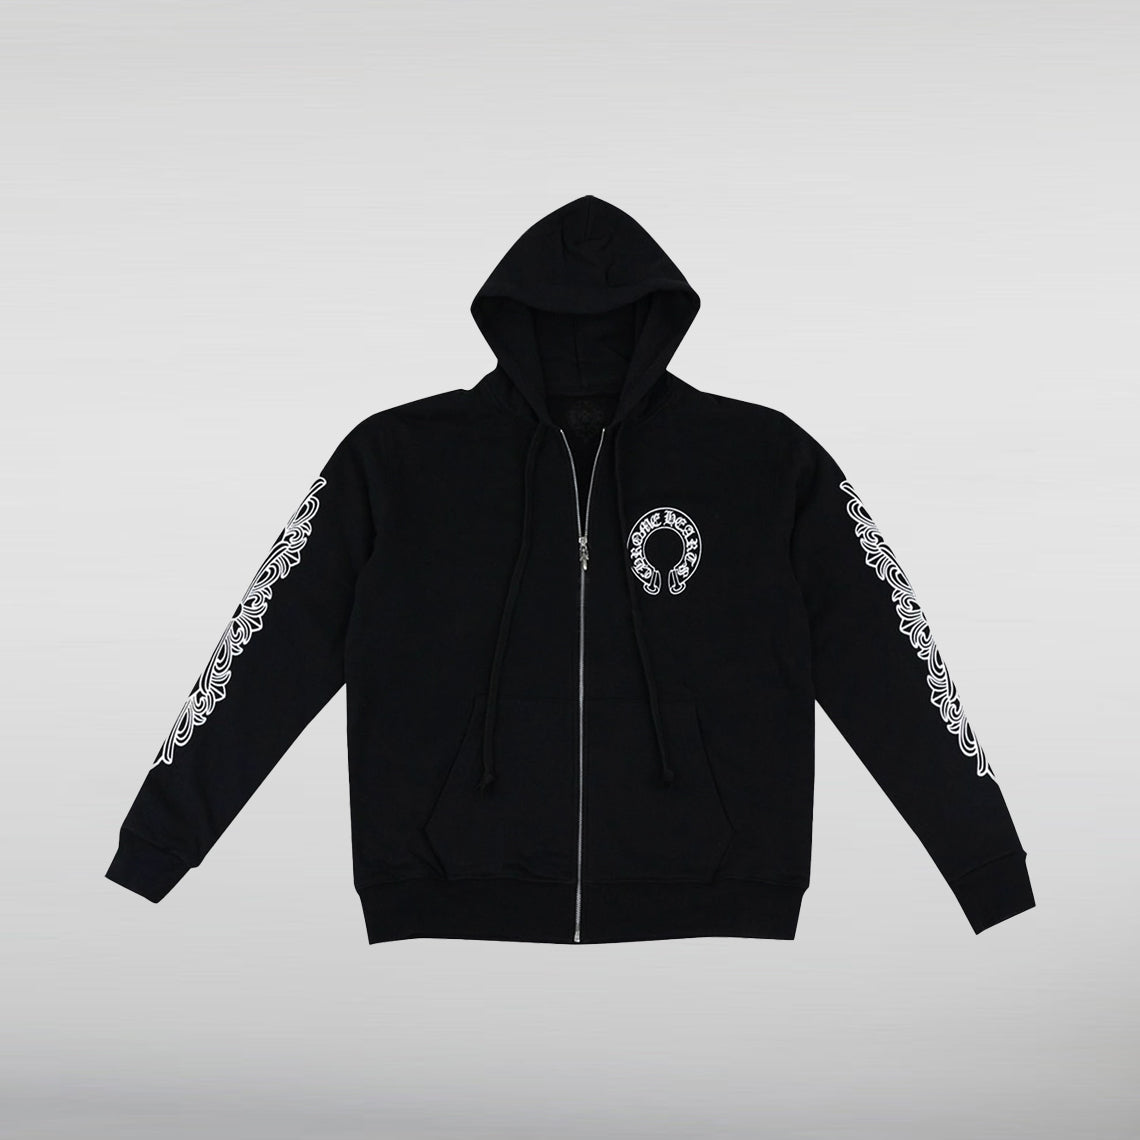 Pullover Black and White Chrome Hearts Hoodie